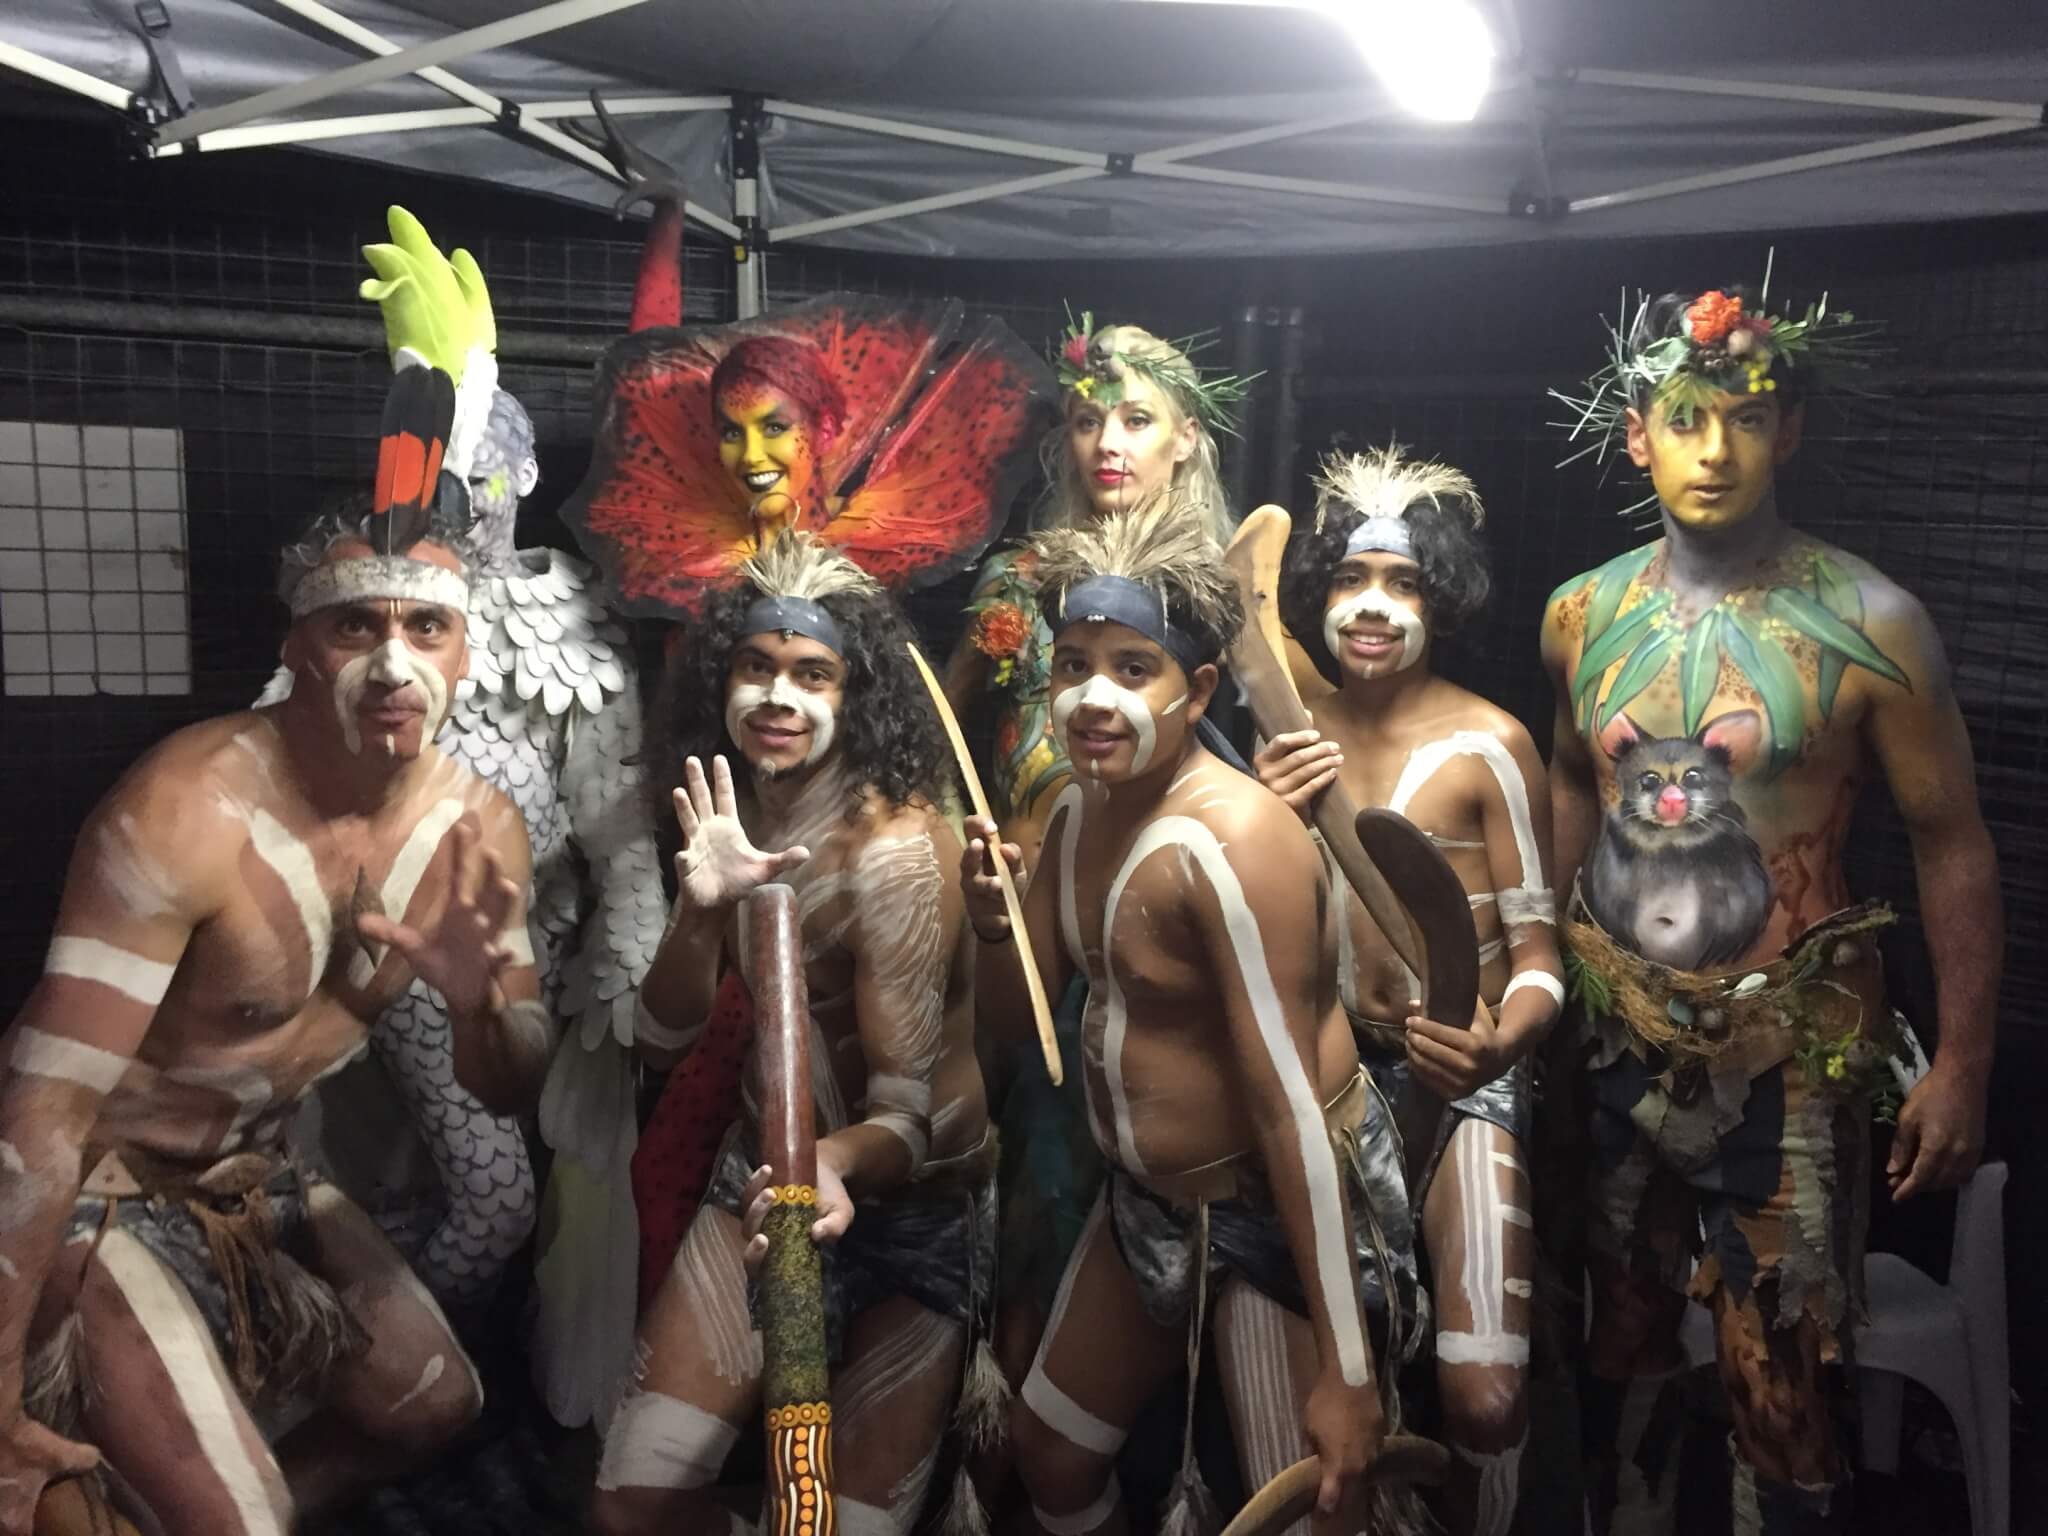 Local Indigenous performers